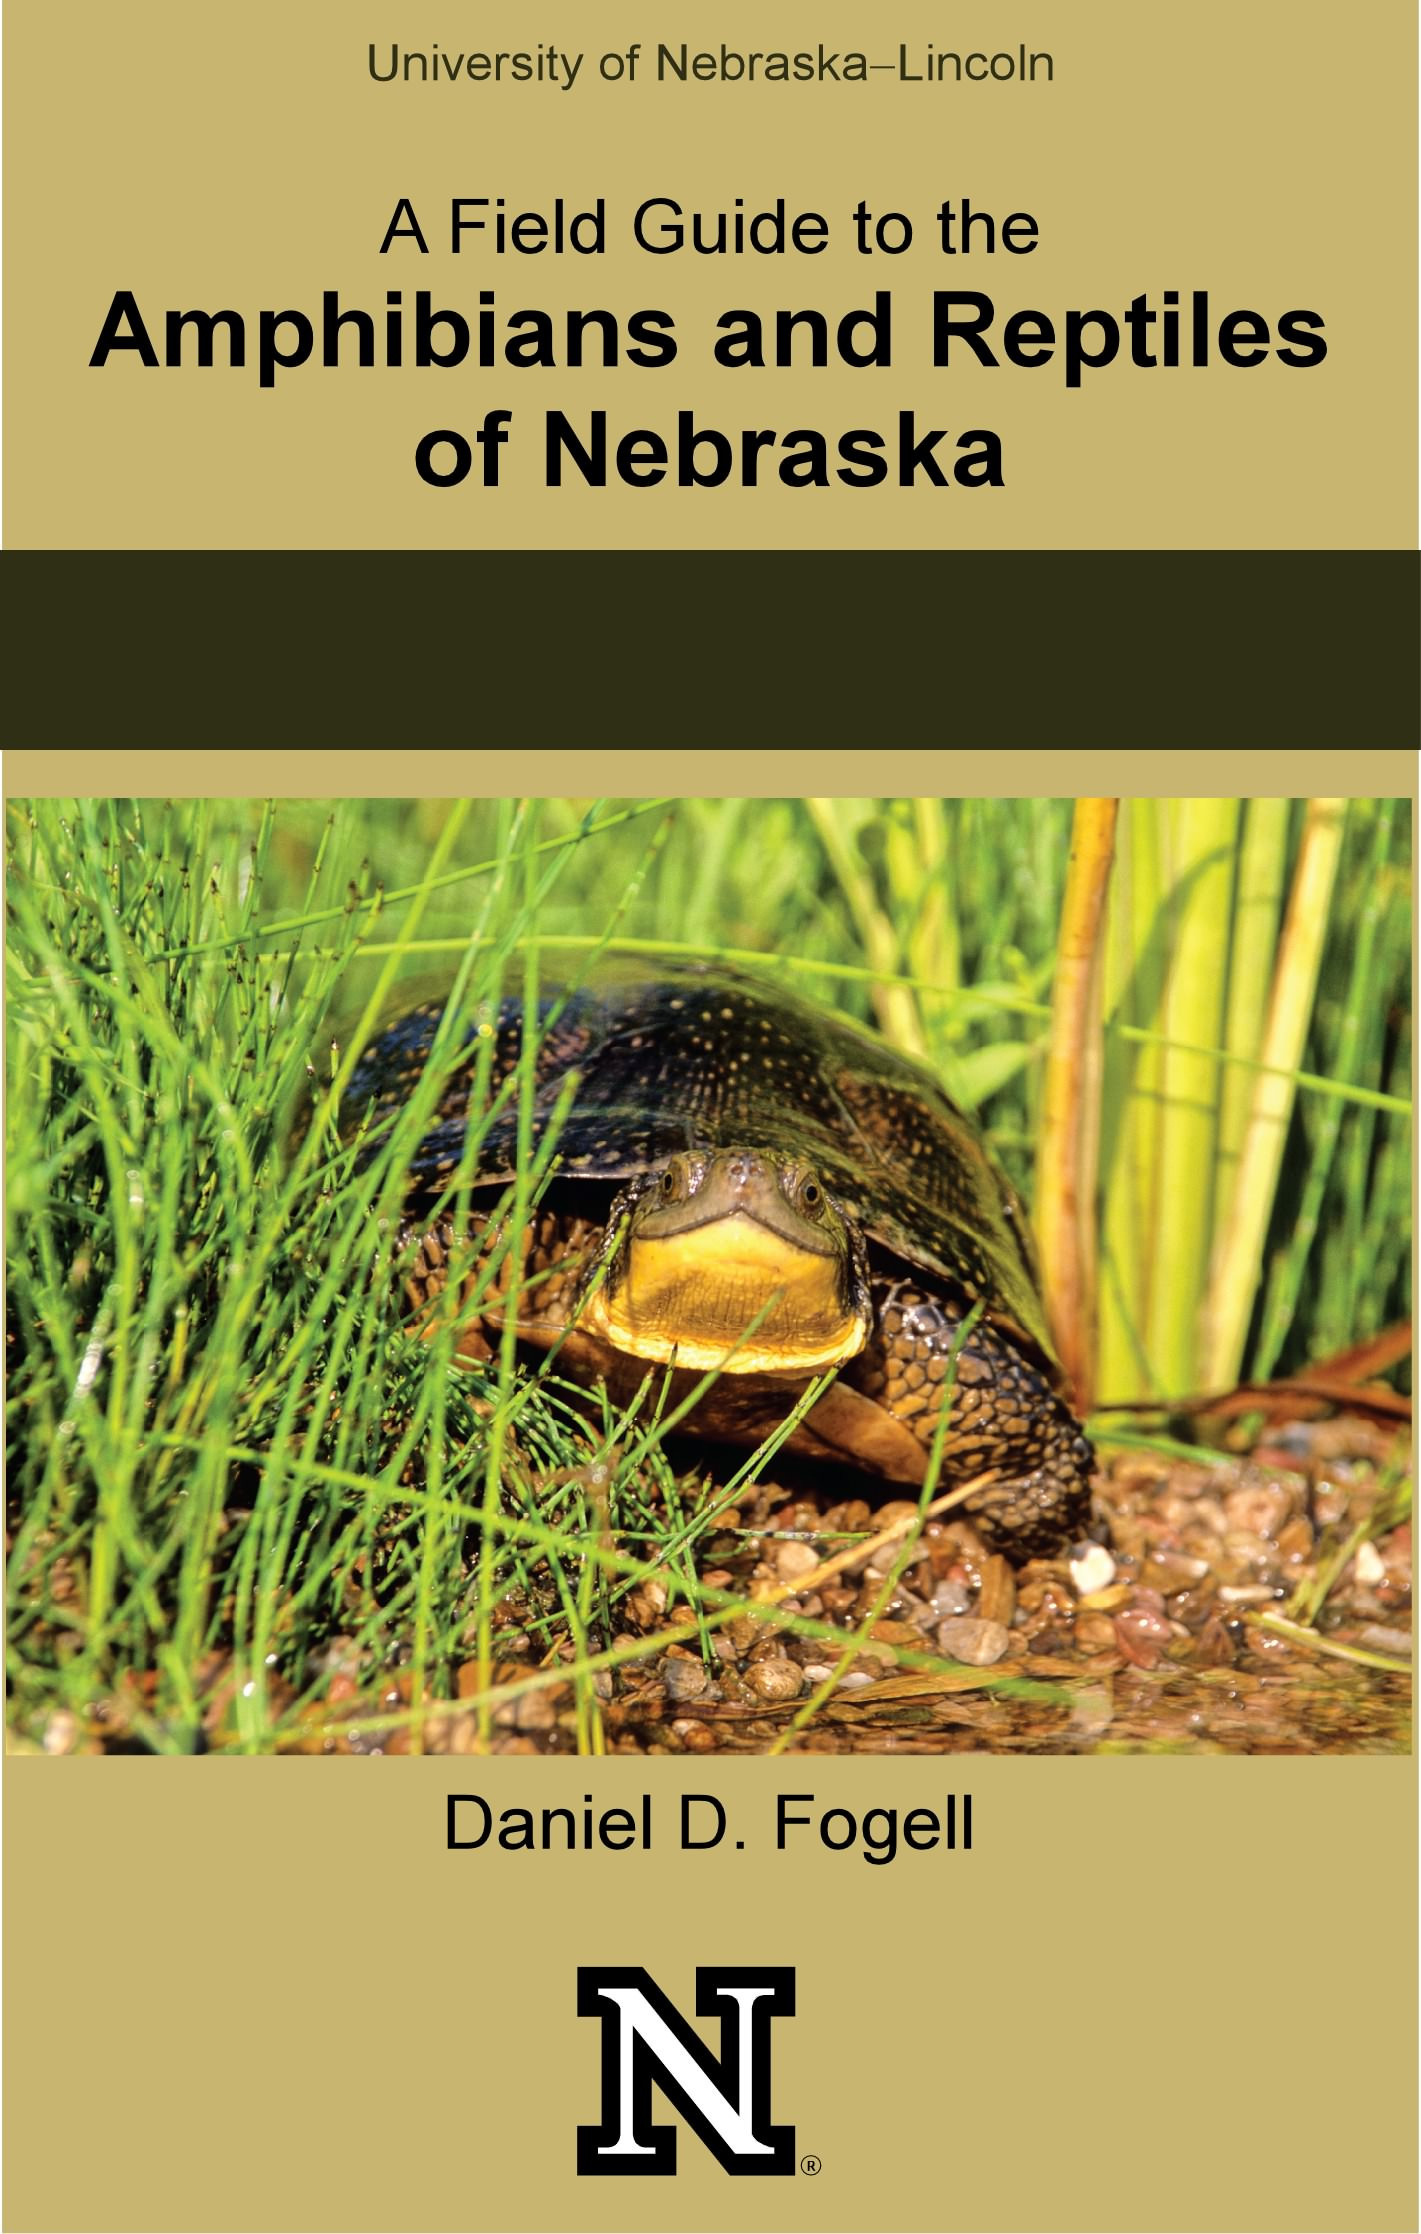 A Field Guide to the Amphibians and Reptiles of Nebraska (FG-21)